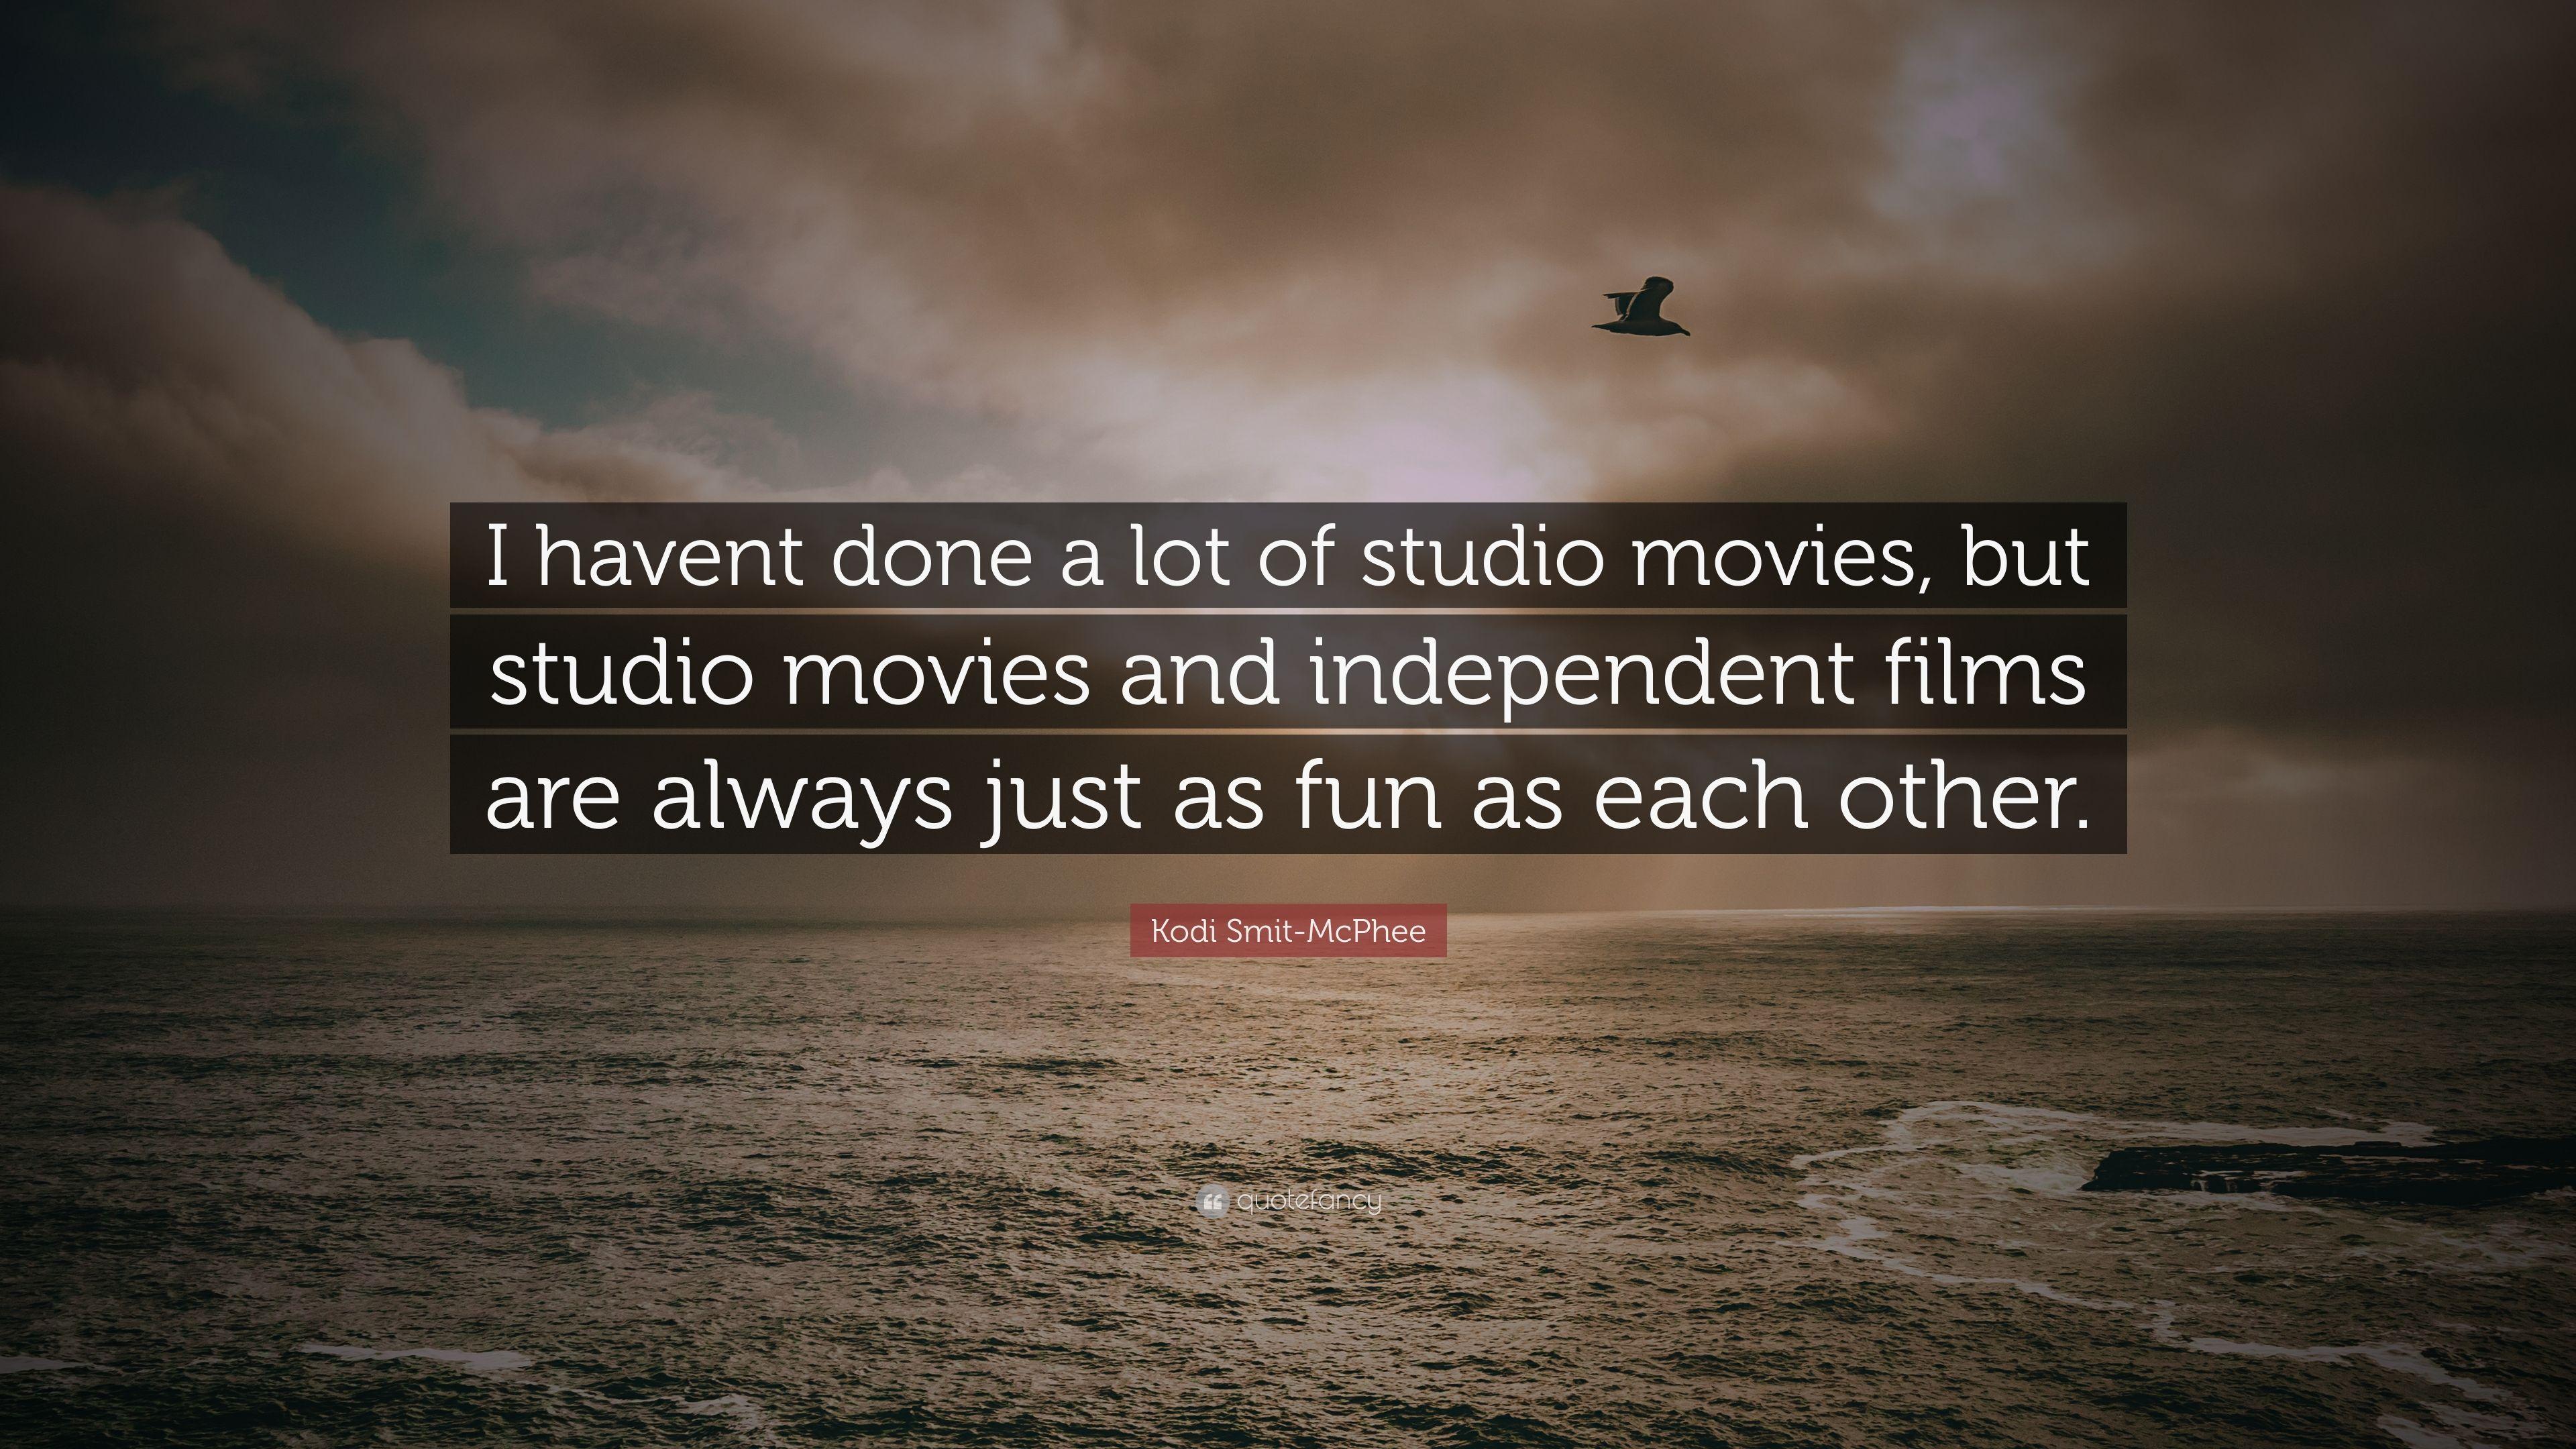 Kodi Smit McPhee Quote: “I Havent Done A Lot Of Studio Movies, But